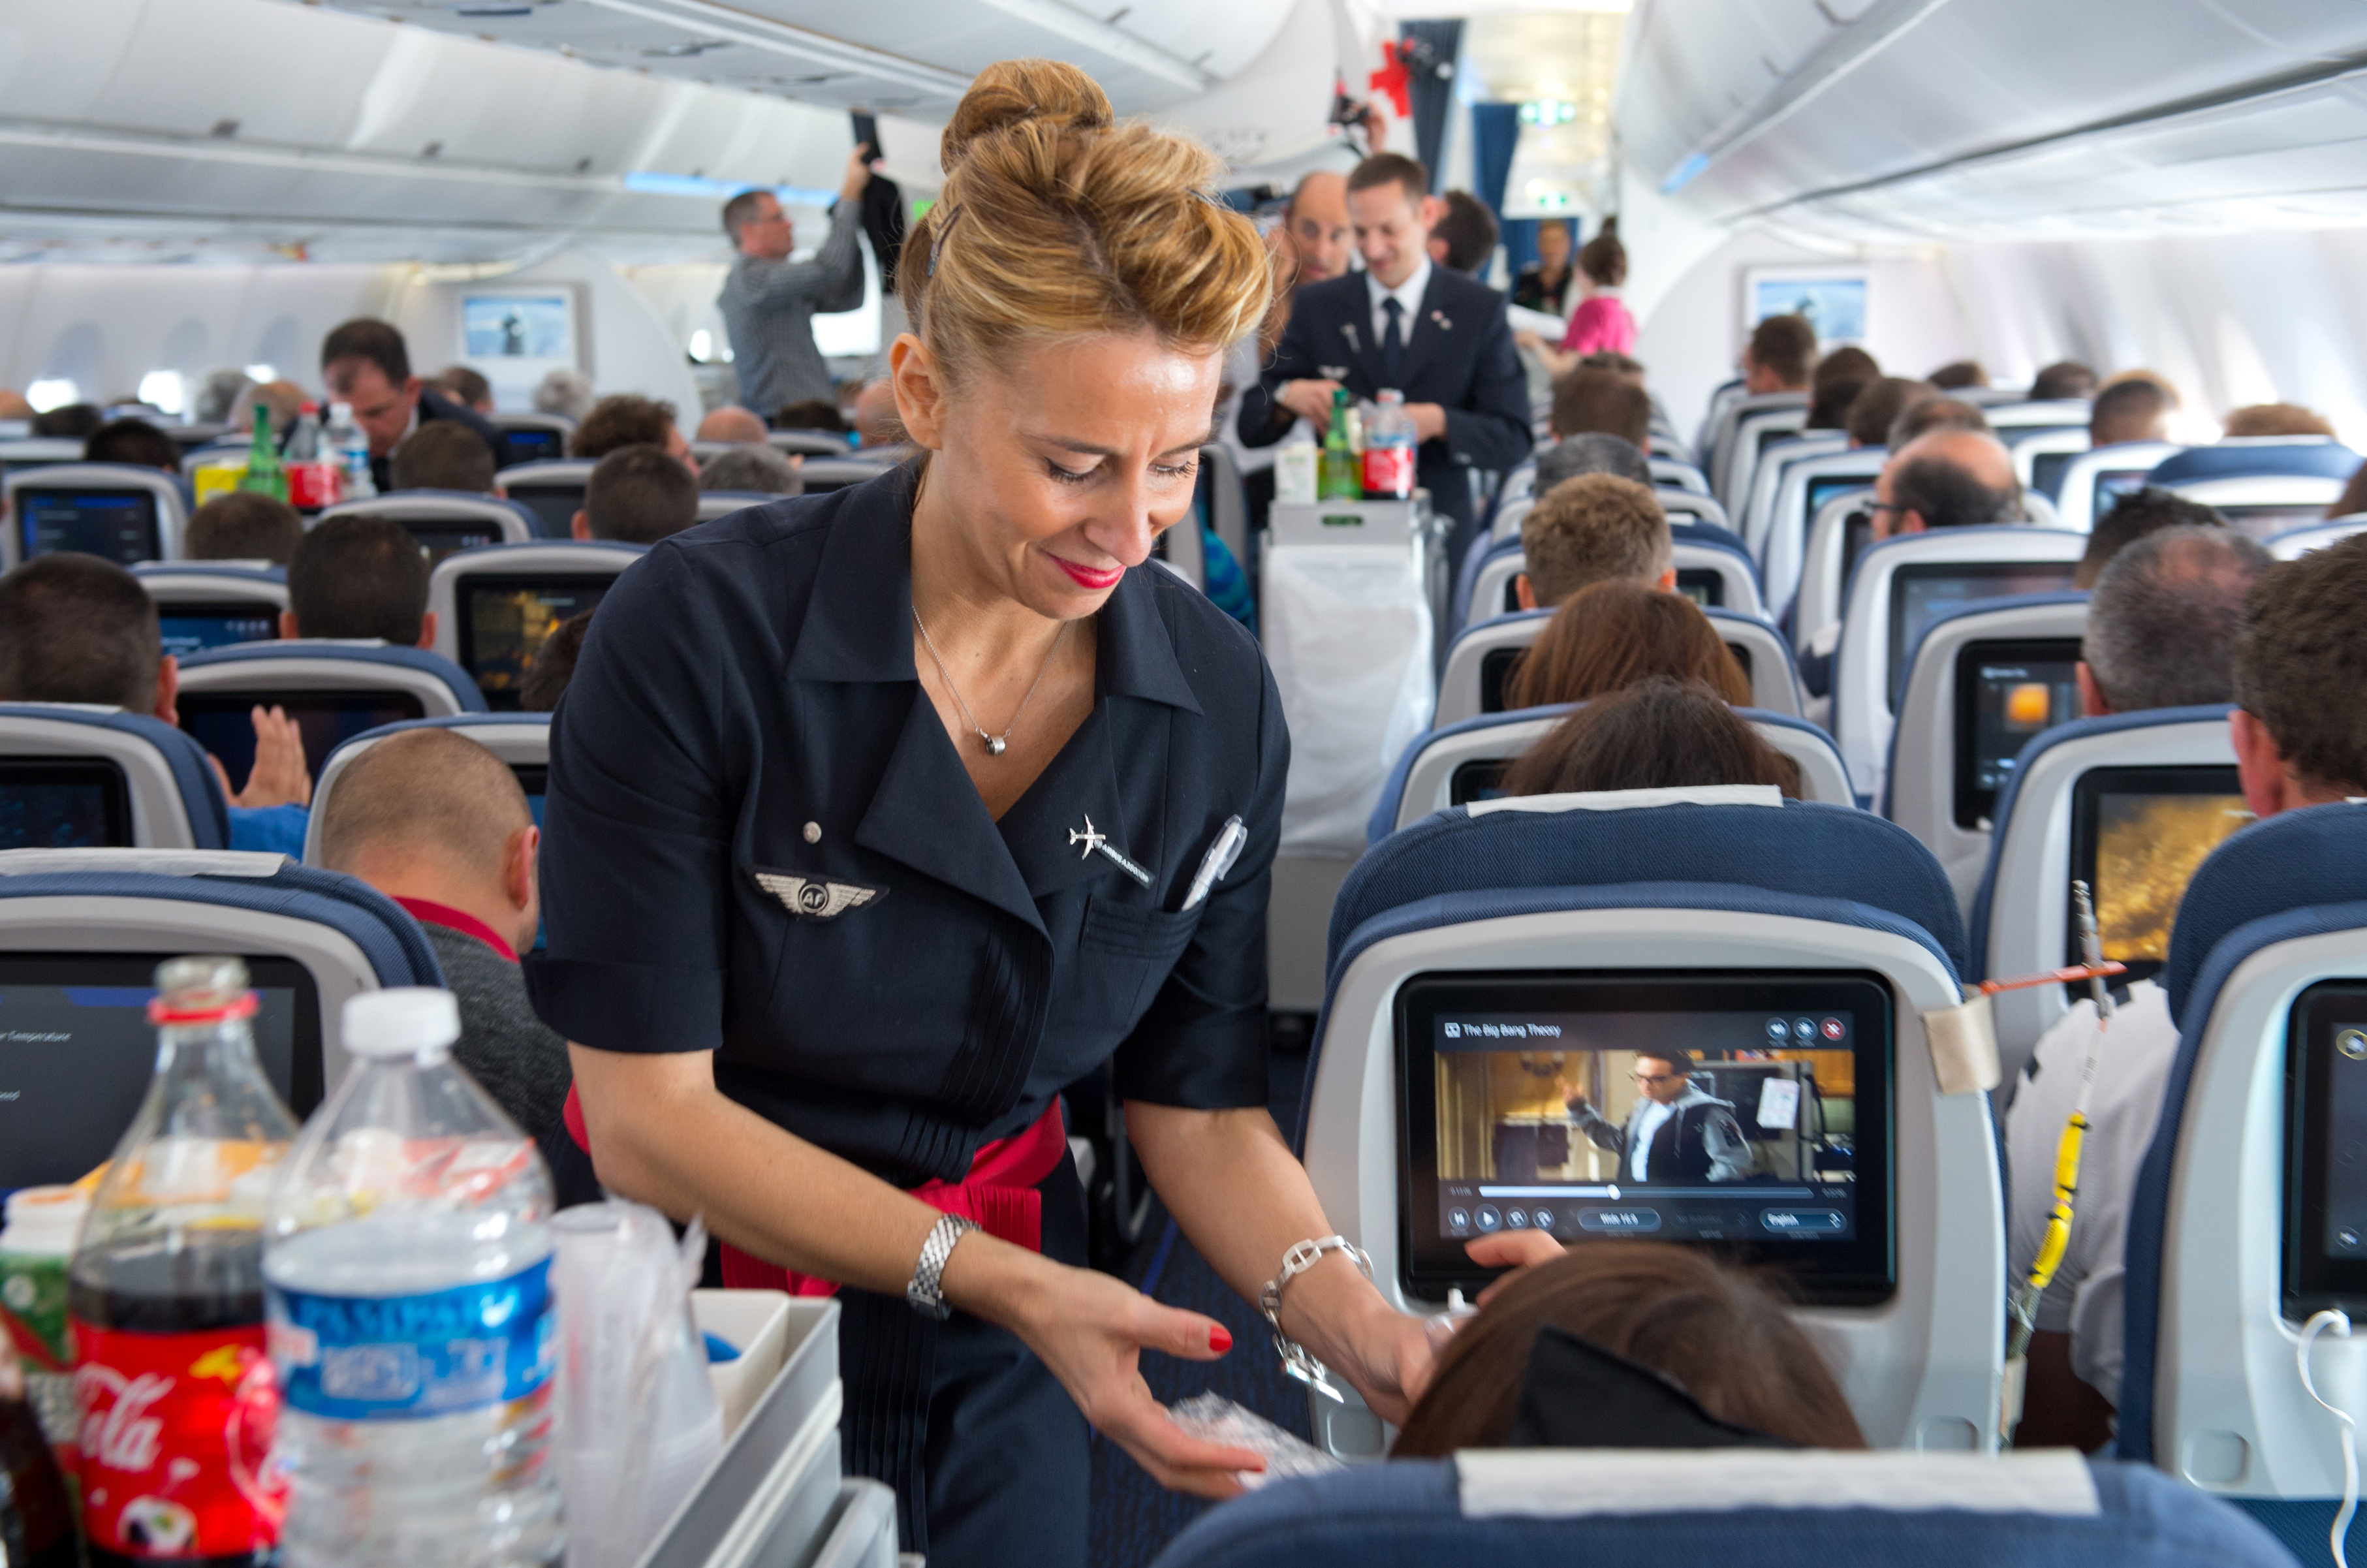 The latest Airbus provides more opportunities for passengers to connect, and that can be a threat